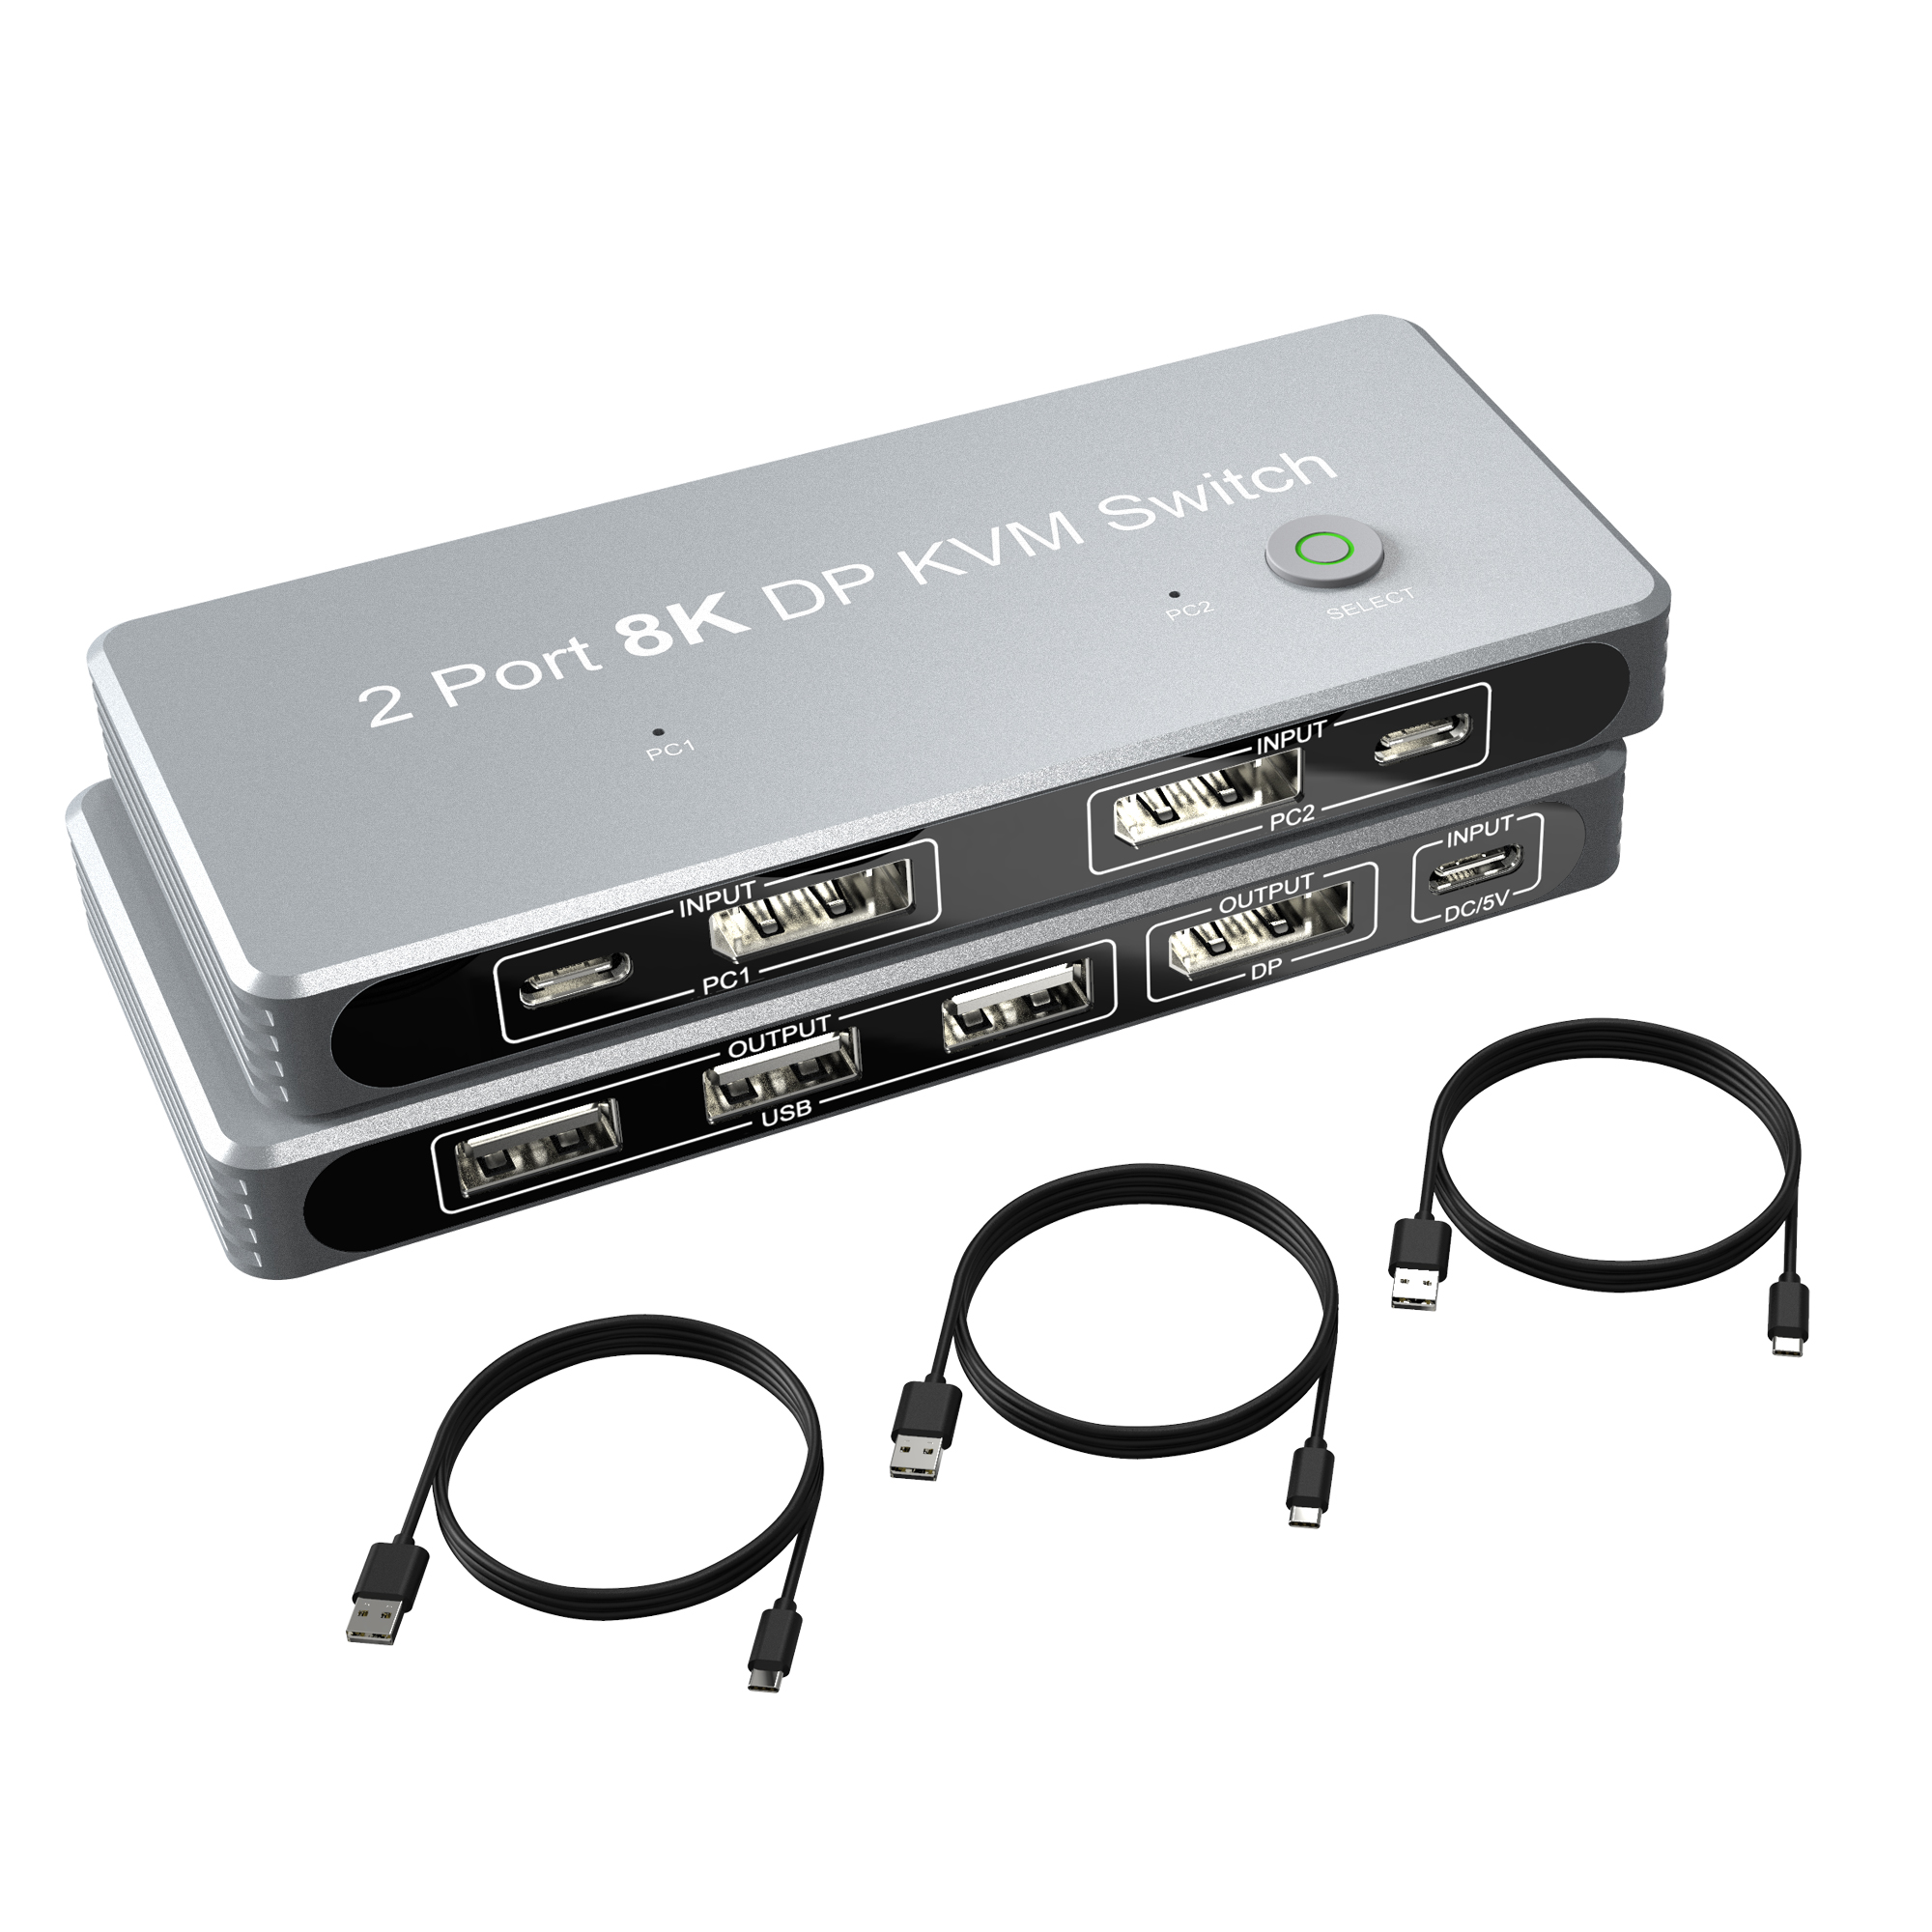 CableDeconn DisplayPort 1.4 8K KVM Switch DP 2 PC 1 DP Monitor 2In 1Out  8K@60Hz 4K@144Hz with 3X USB2.0 Port 2 PC Sharing one Keyboard Mouse  T0206-Diplayport Adapter-CableDeconn